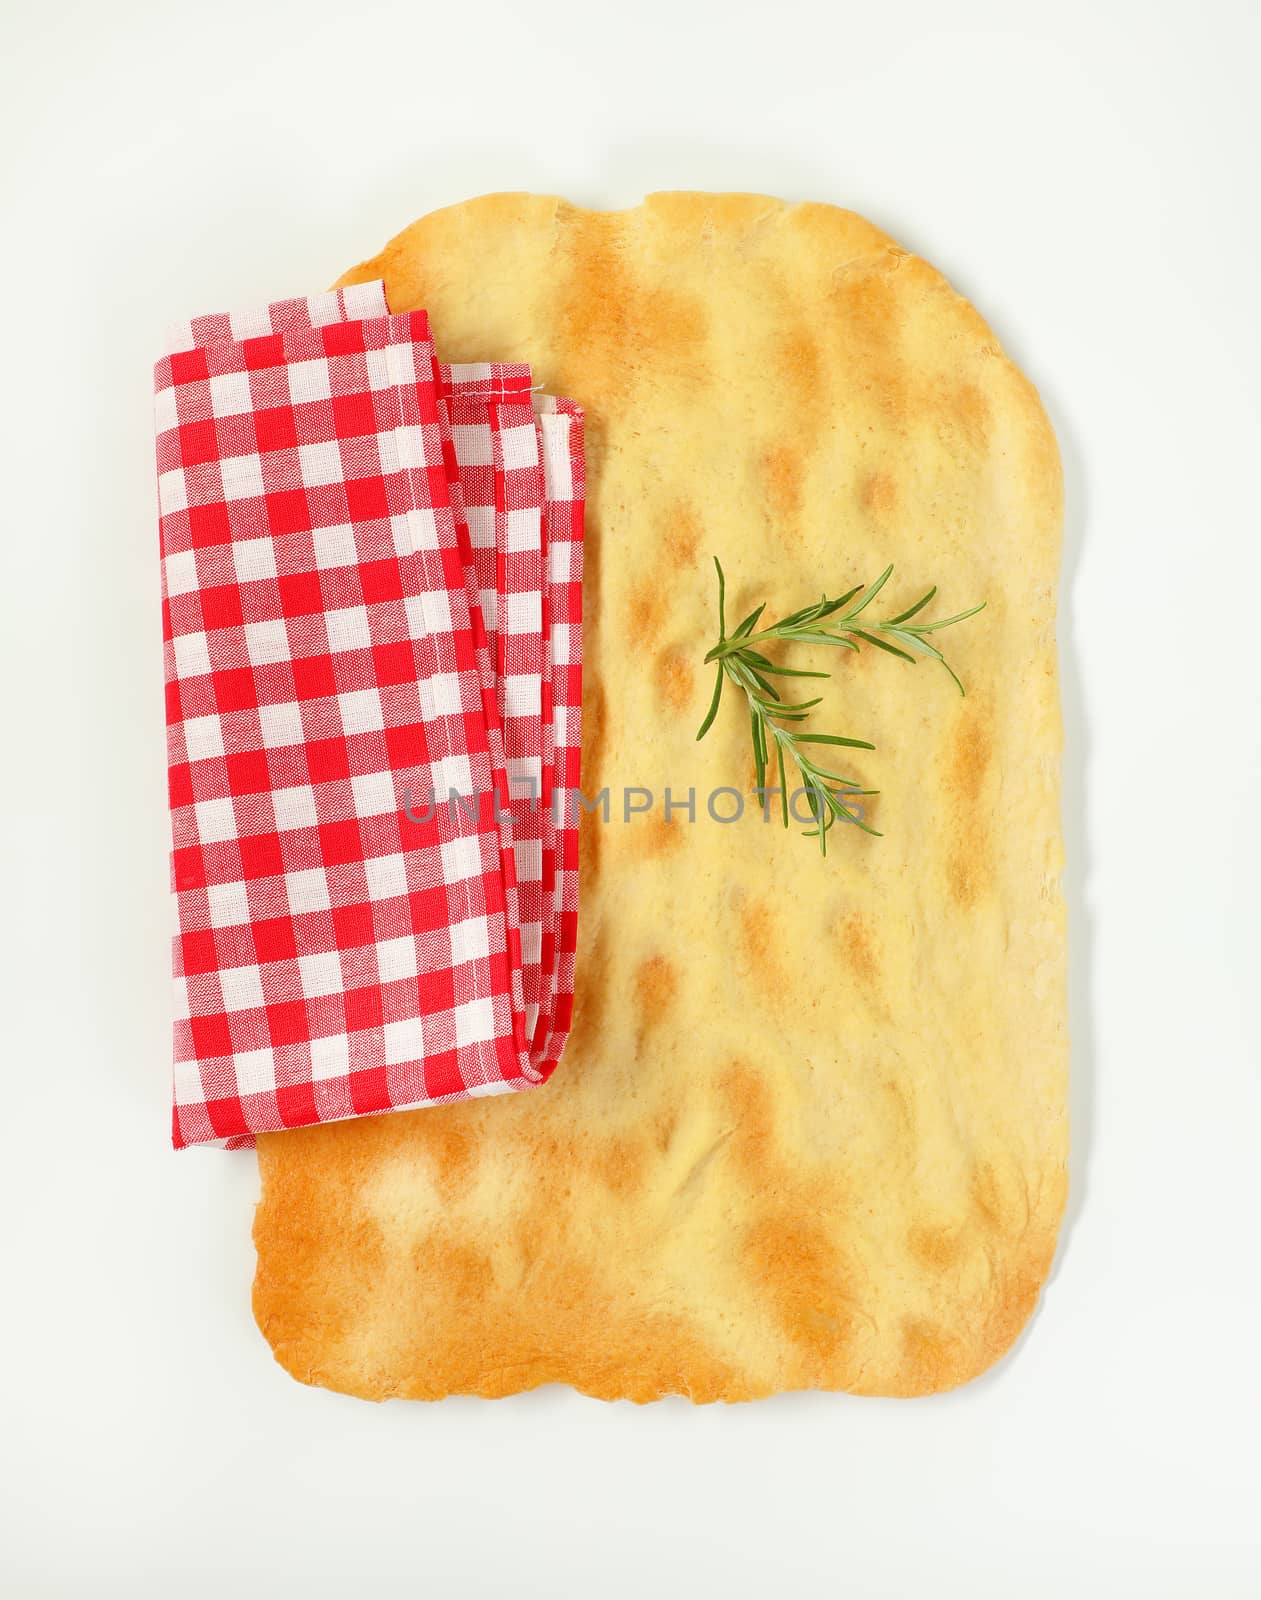 cracker-like Italian flat bread made with white flour that is rolled into very thin sheets